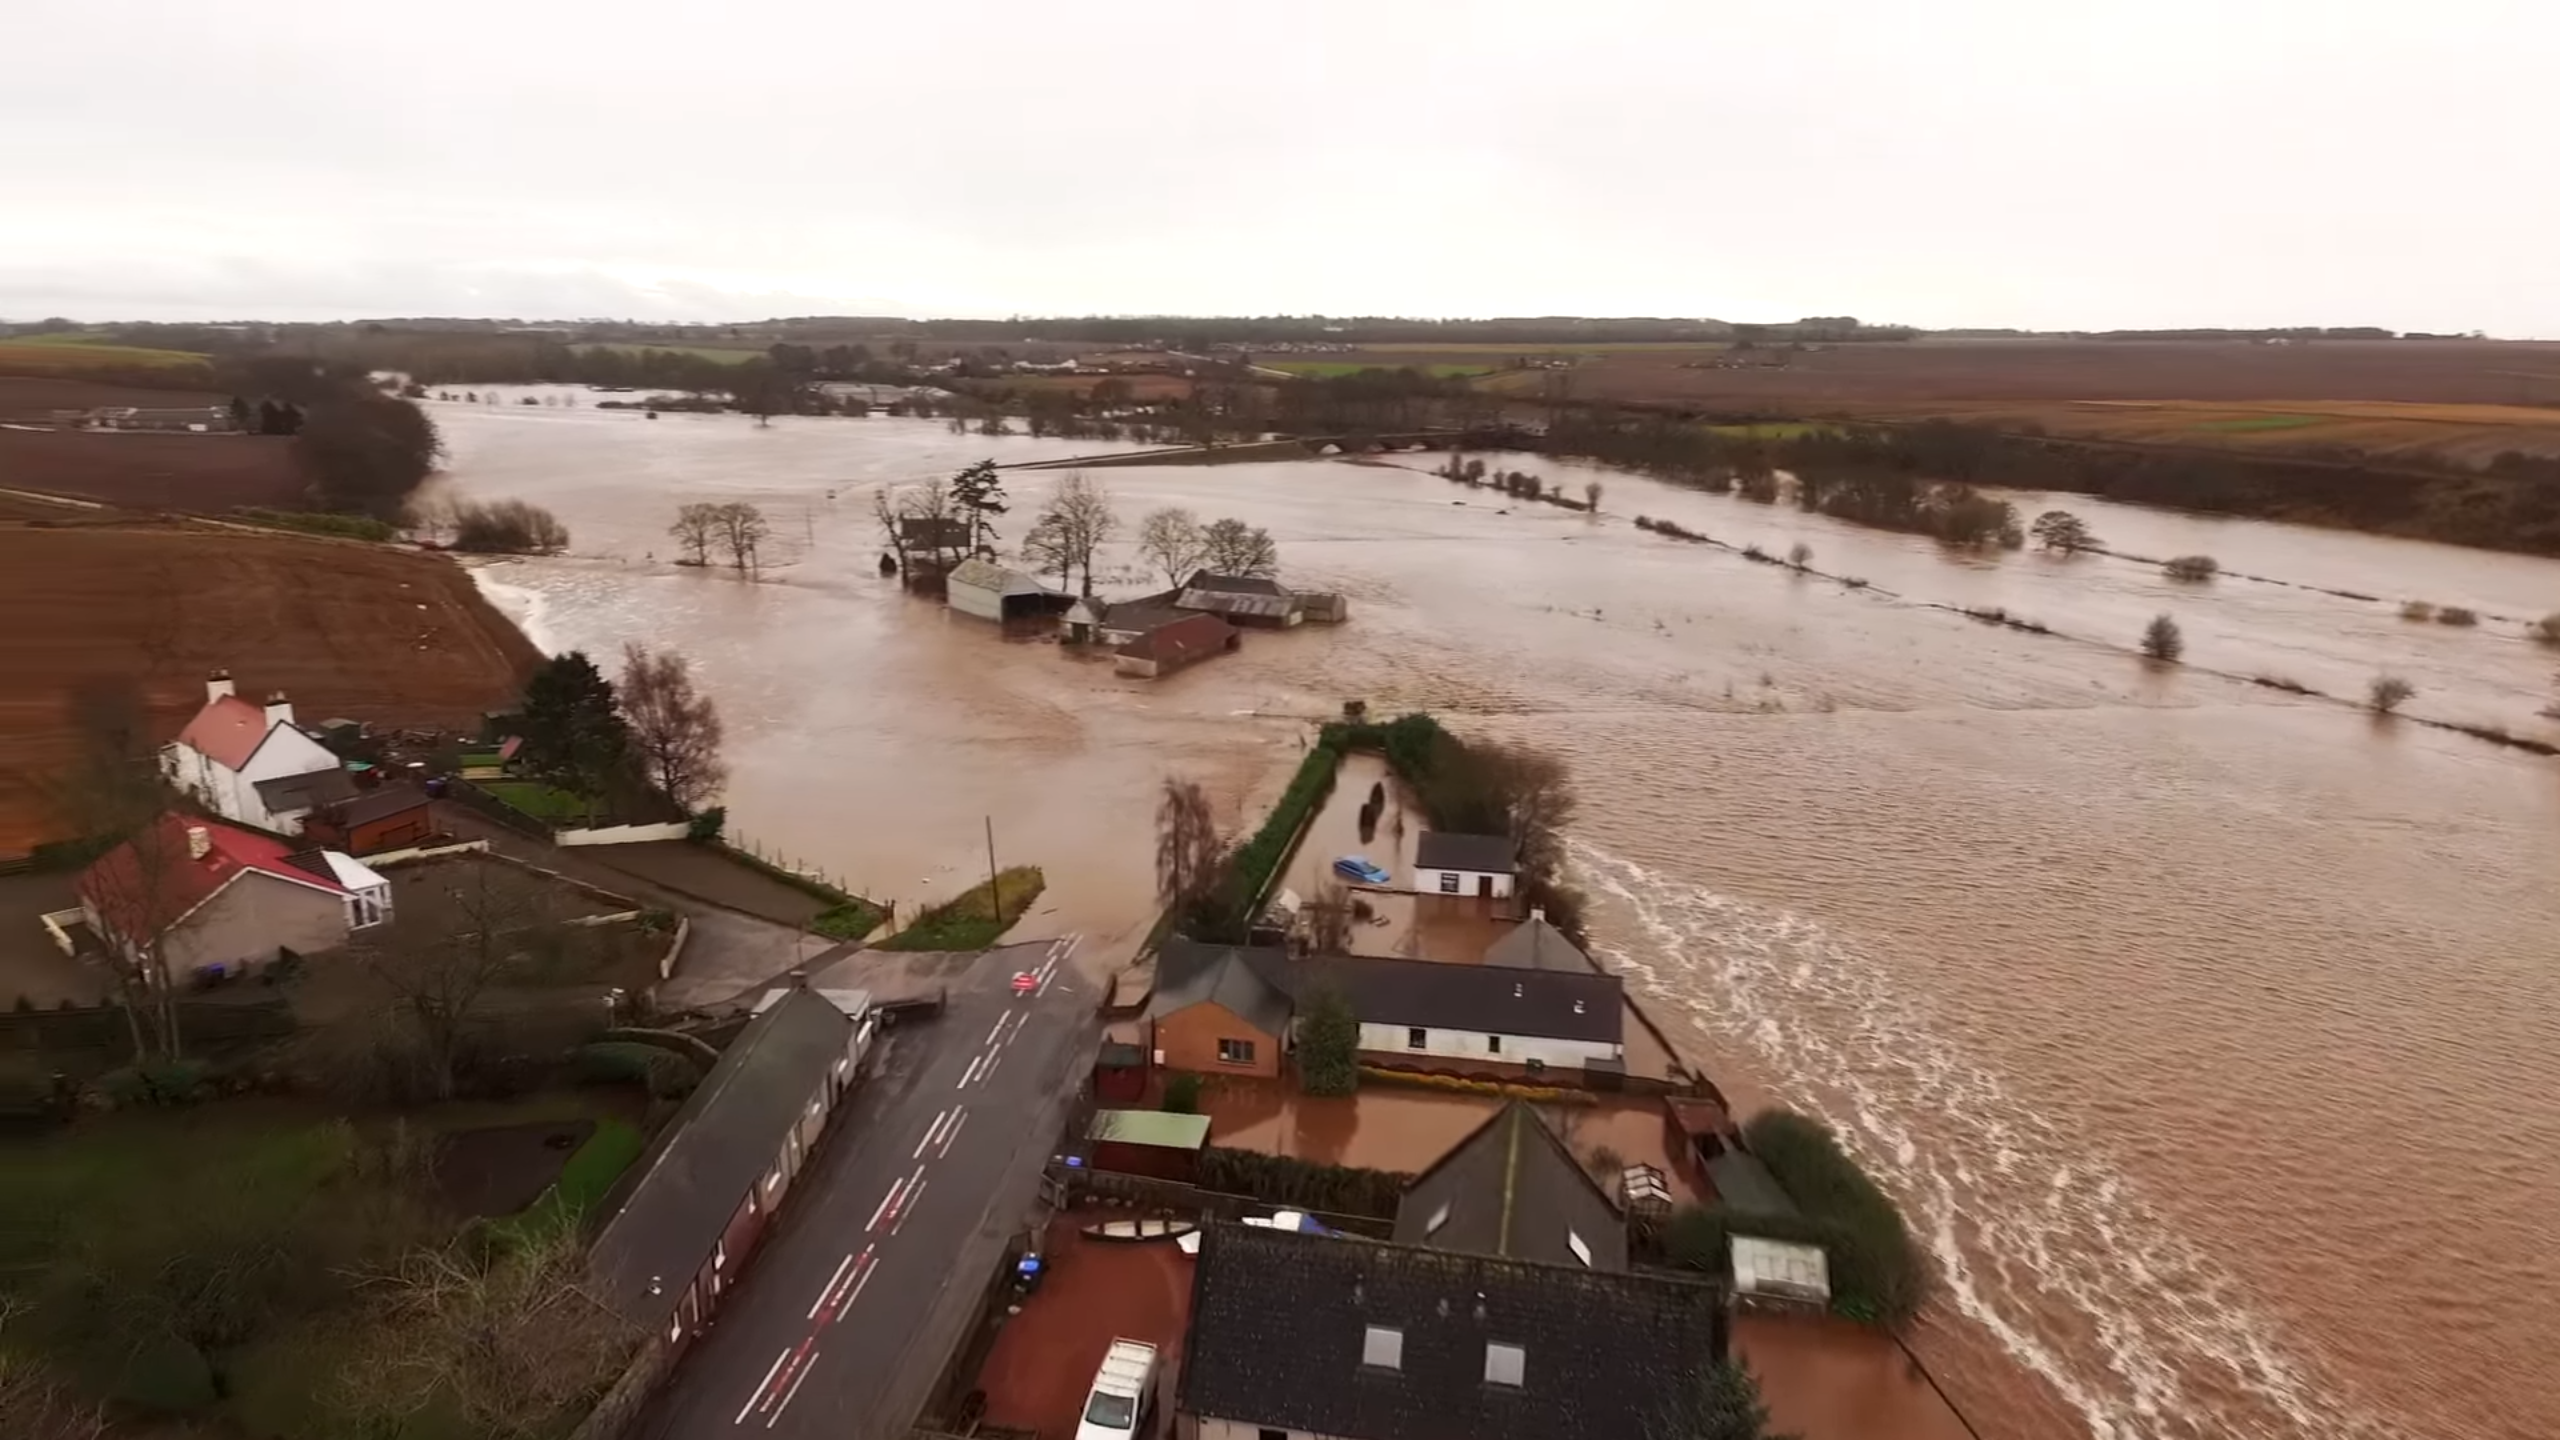 Drone footage shows flooding over Markirk, Aberdeenshire